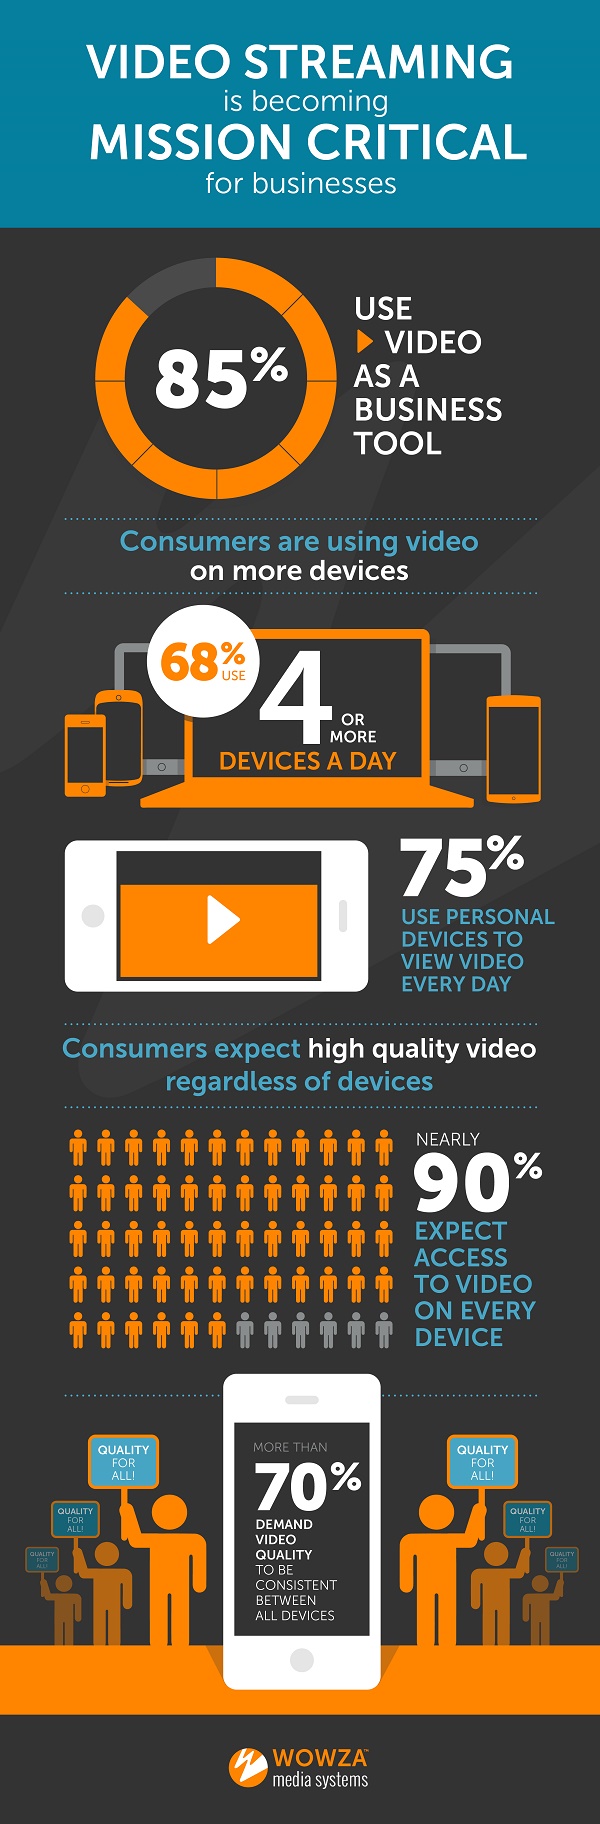 wowza_video_streaming_infographic_v2-01